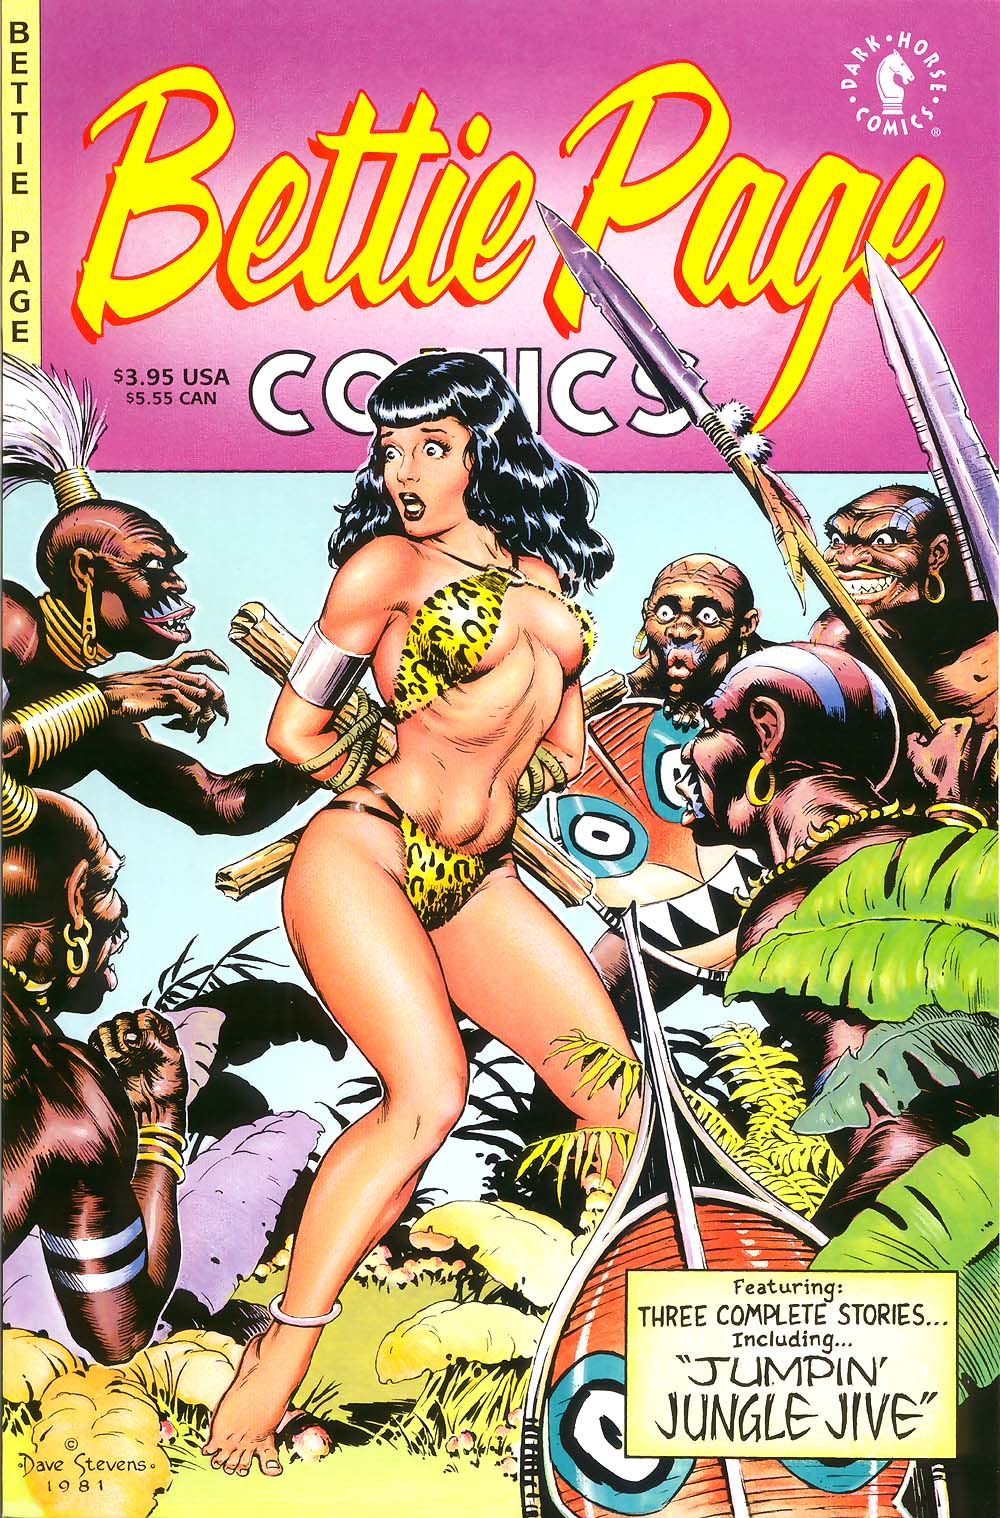 Read online Bettie Page Comics comic -  Issue # Full - 1